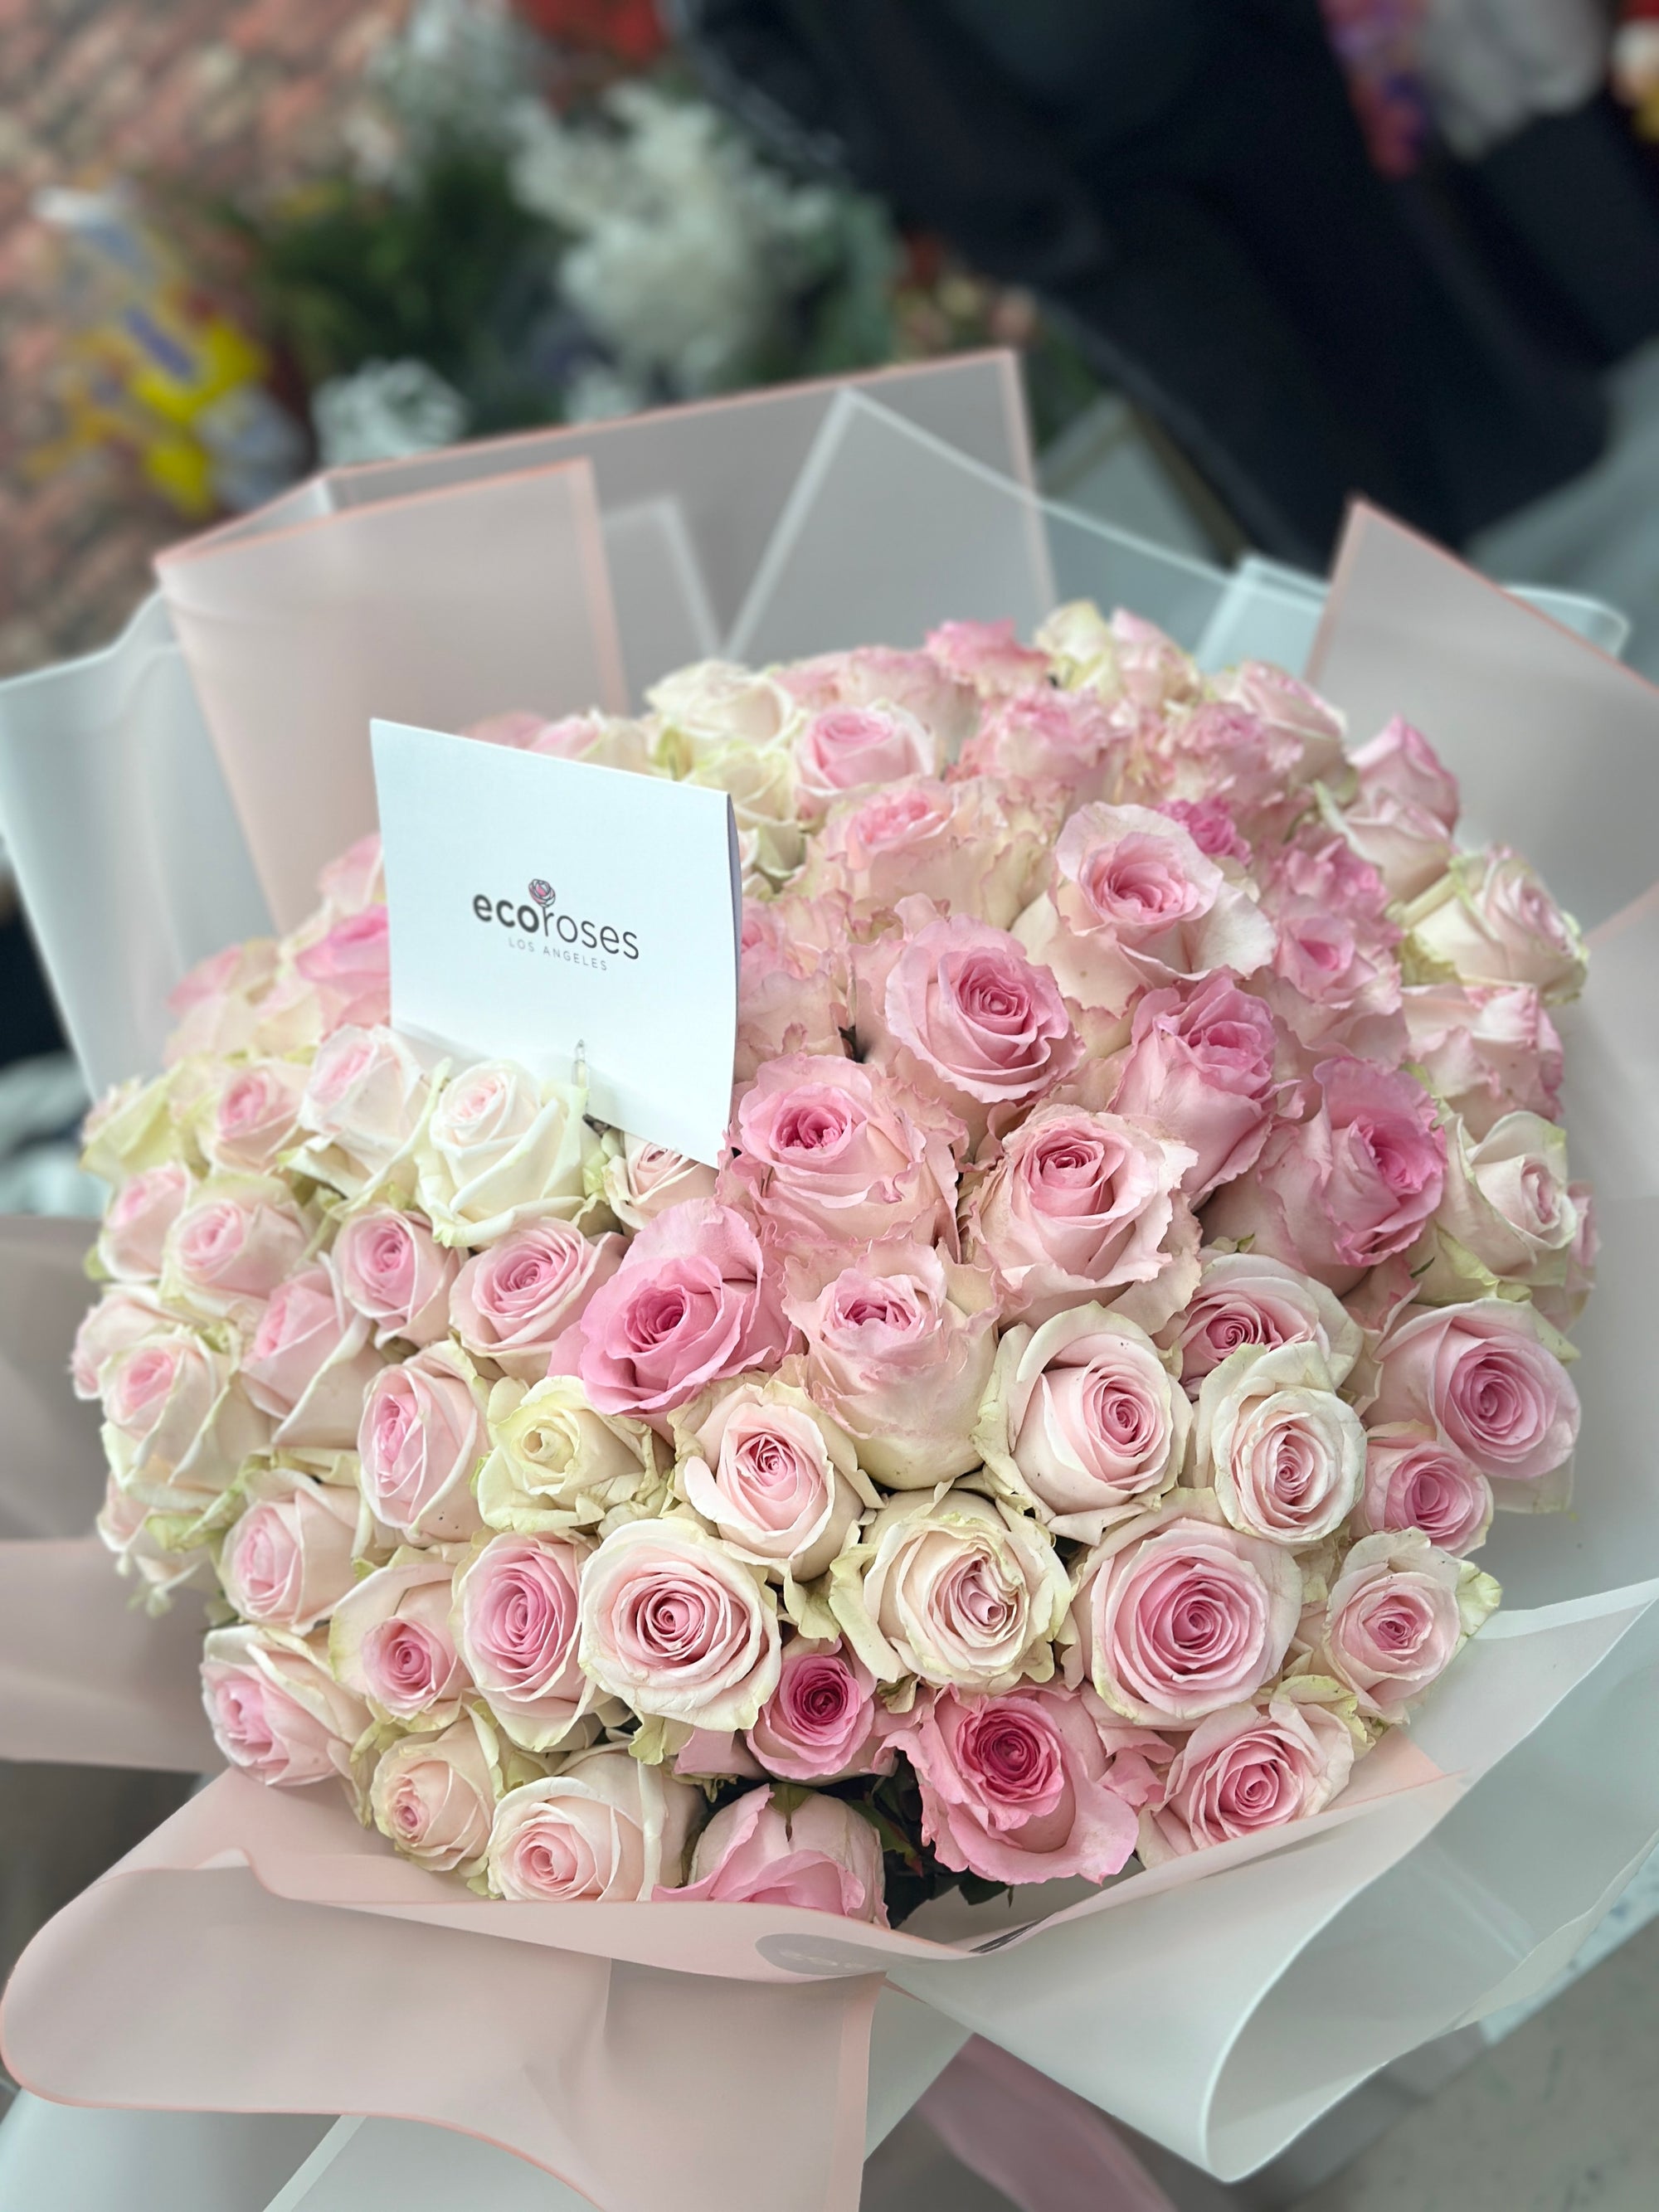 Flower Shop In Glendale Ca Pink Paradise bouquet features premium, long-stemmed pink roses, carefully hand-picked and arranged for maximum freshness and beauty Shop In Glendale Ca